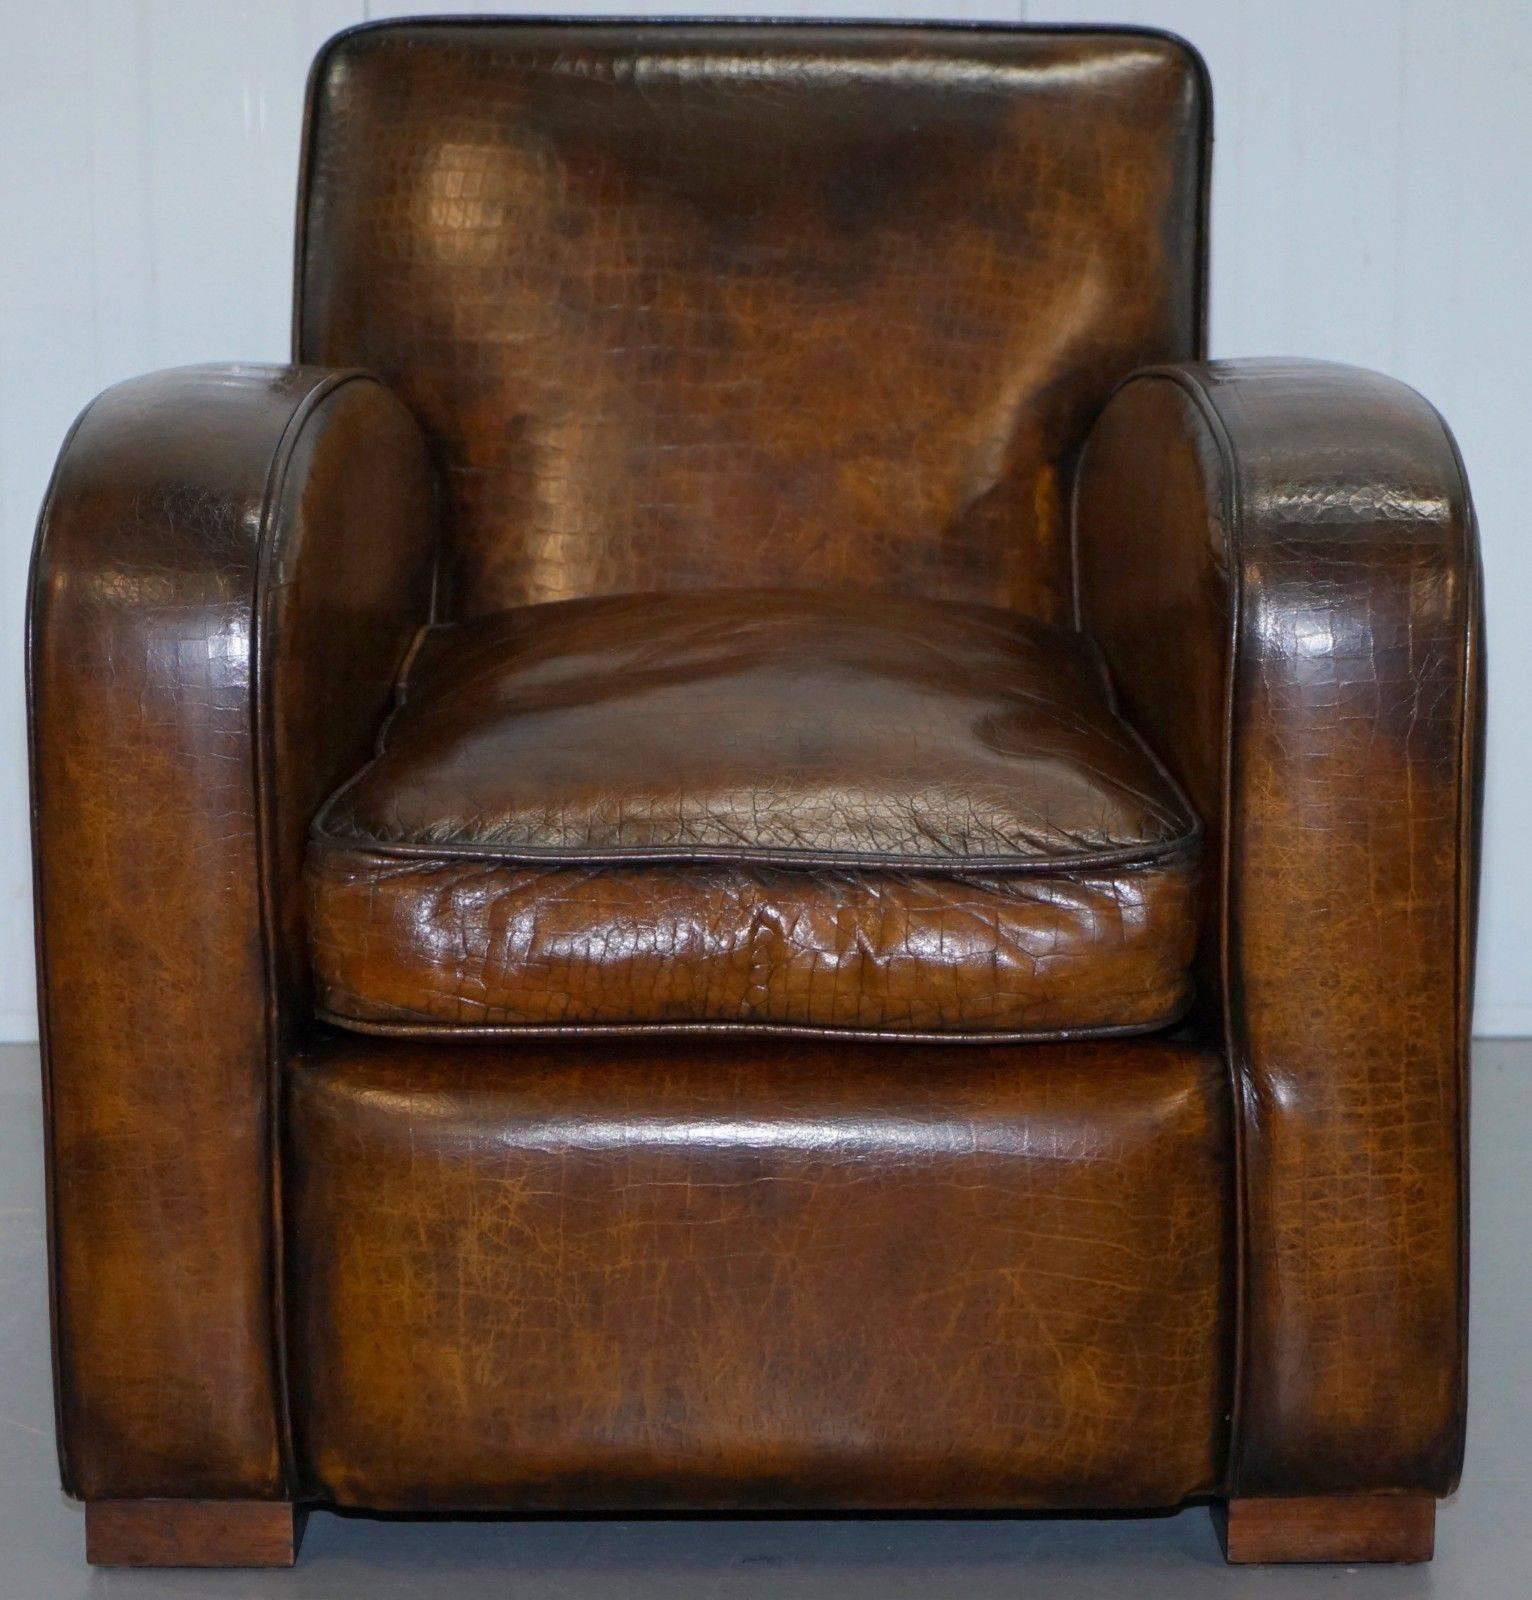 We are delighted to offer for sale this stunning fully restored vintage French club armchair with crocodile / alligator patina leather upholstery

A very rare and distinctive club armchair, I have only ever seen one other vintage piece like this